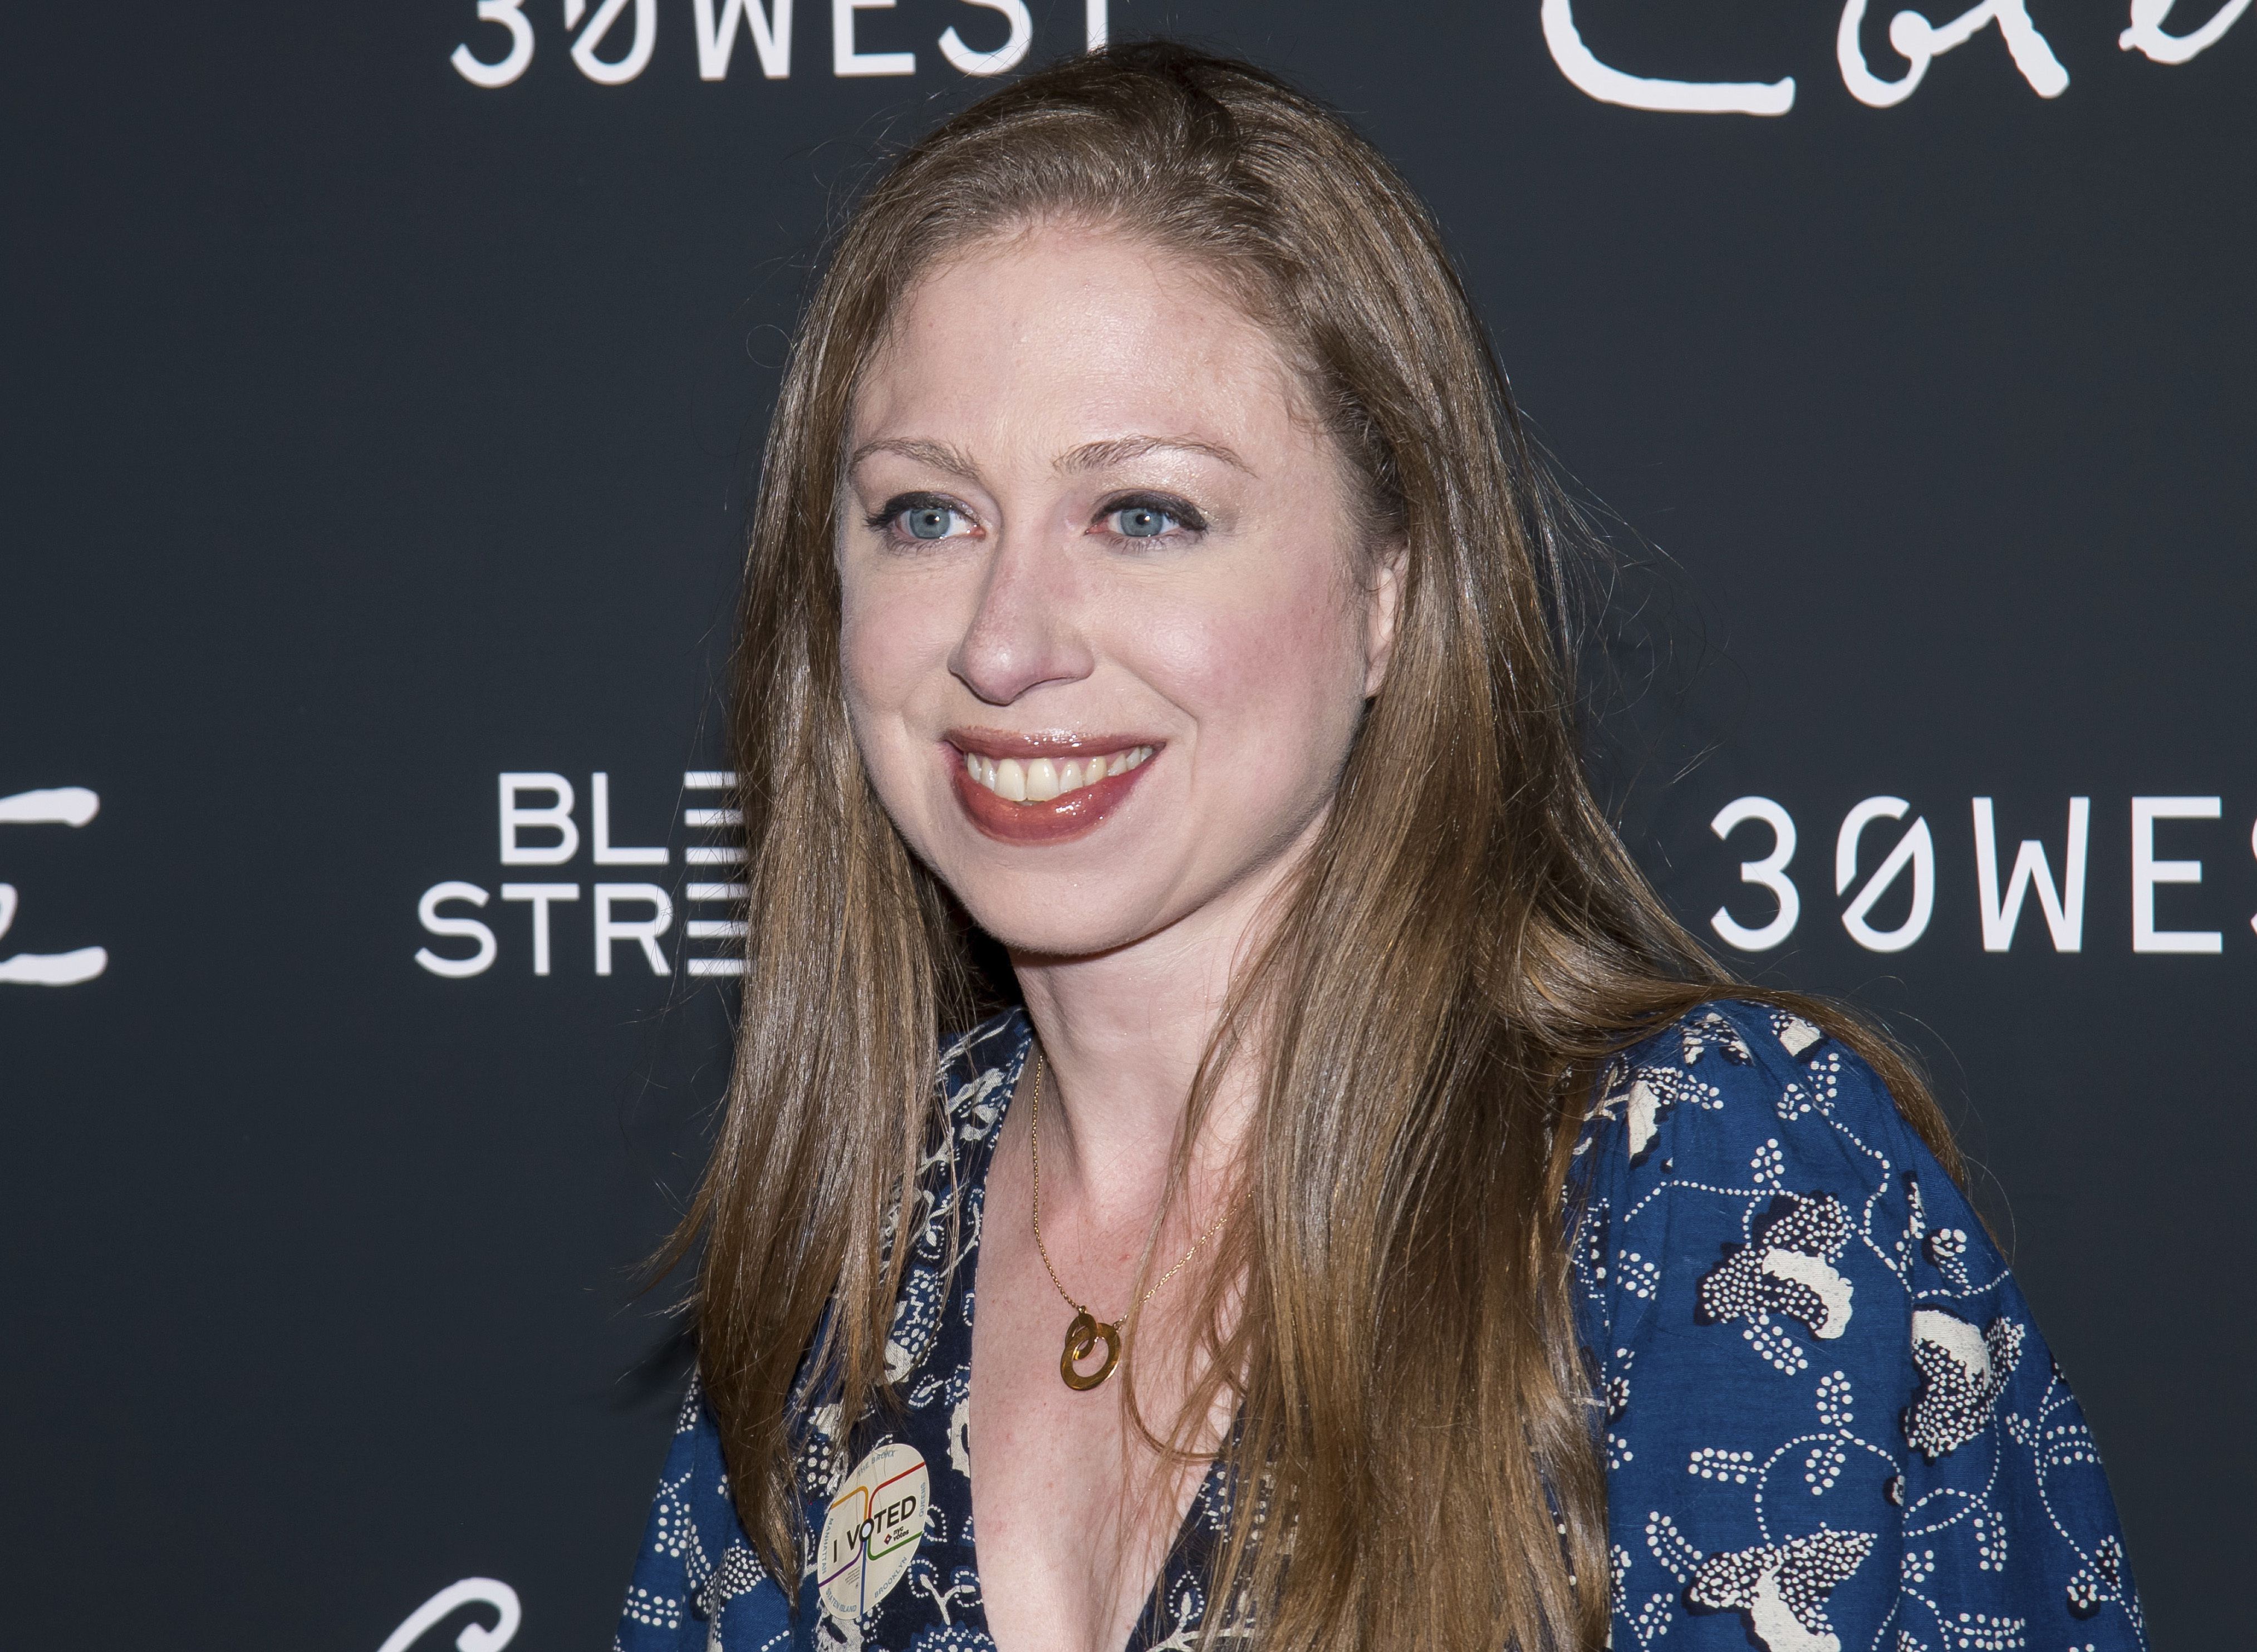 Chelsea Clinton to launch nonfiction book imprint this fall